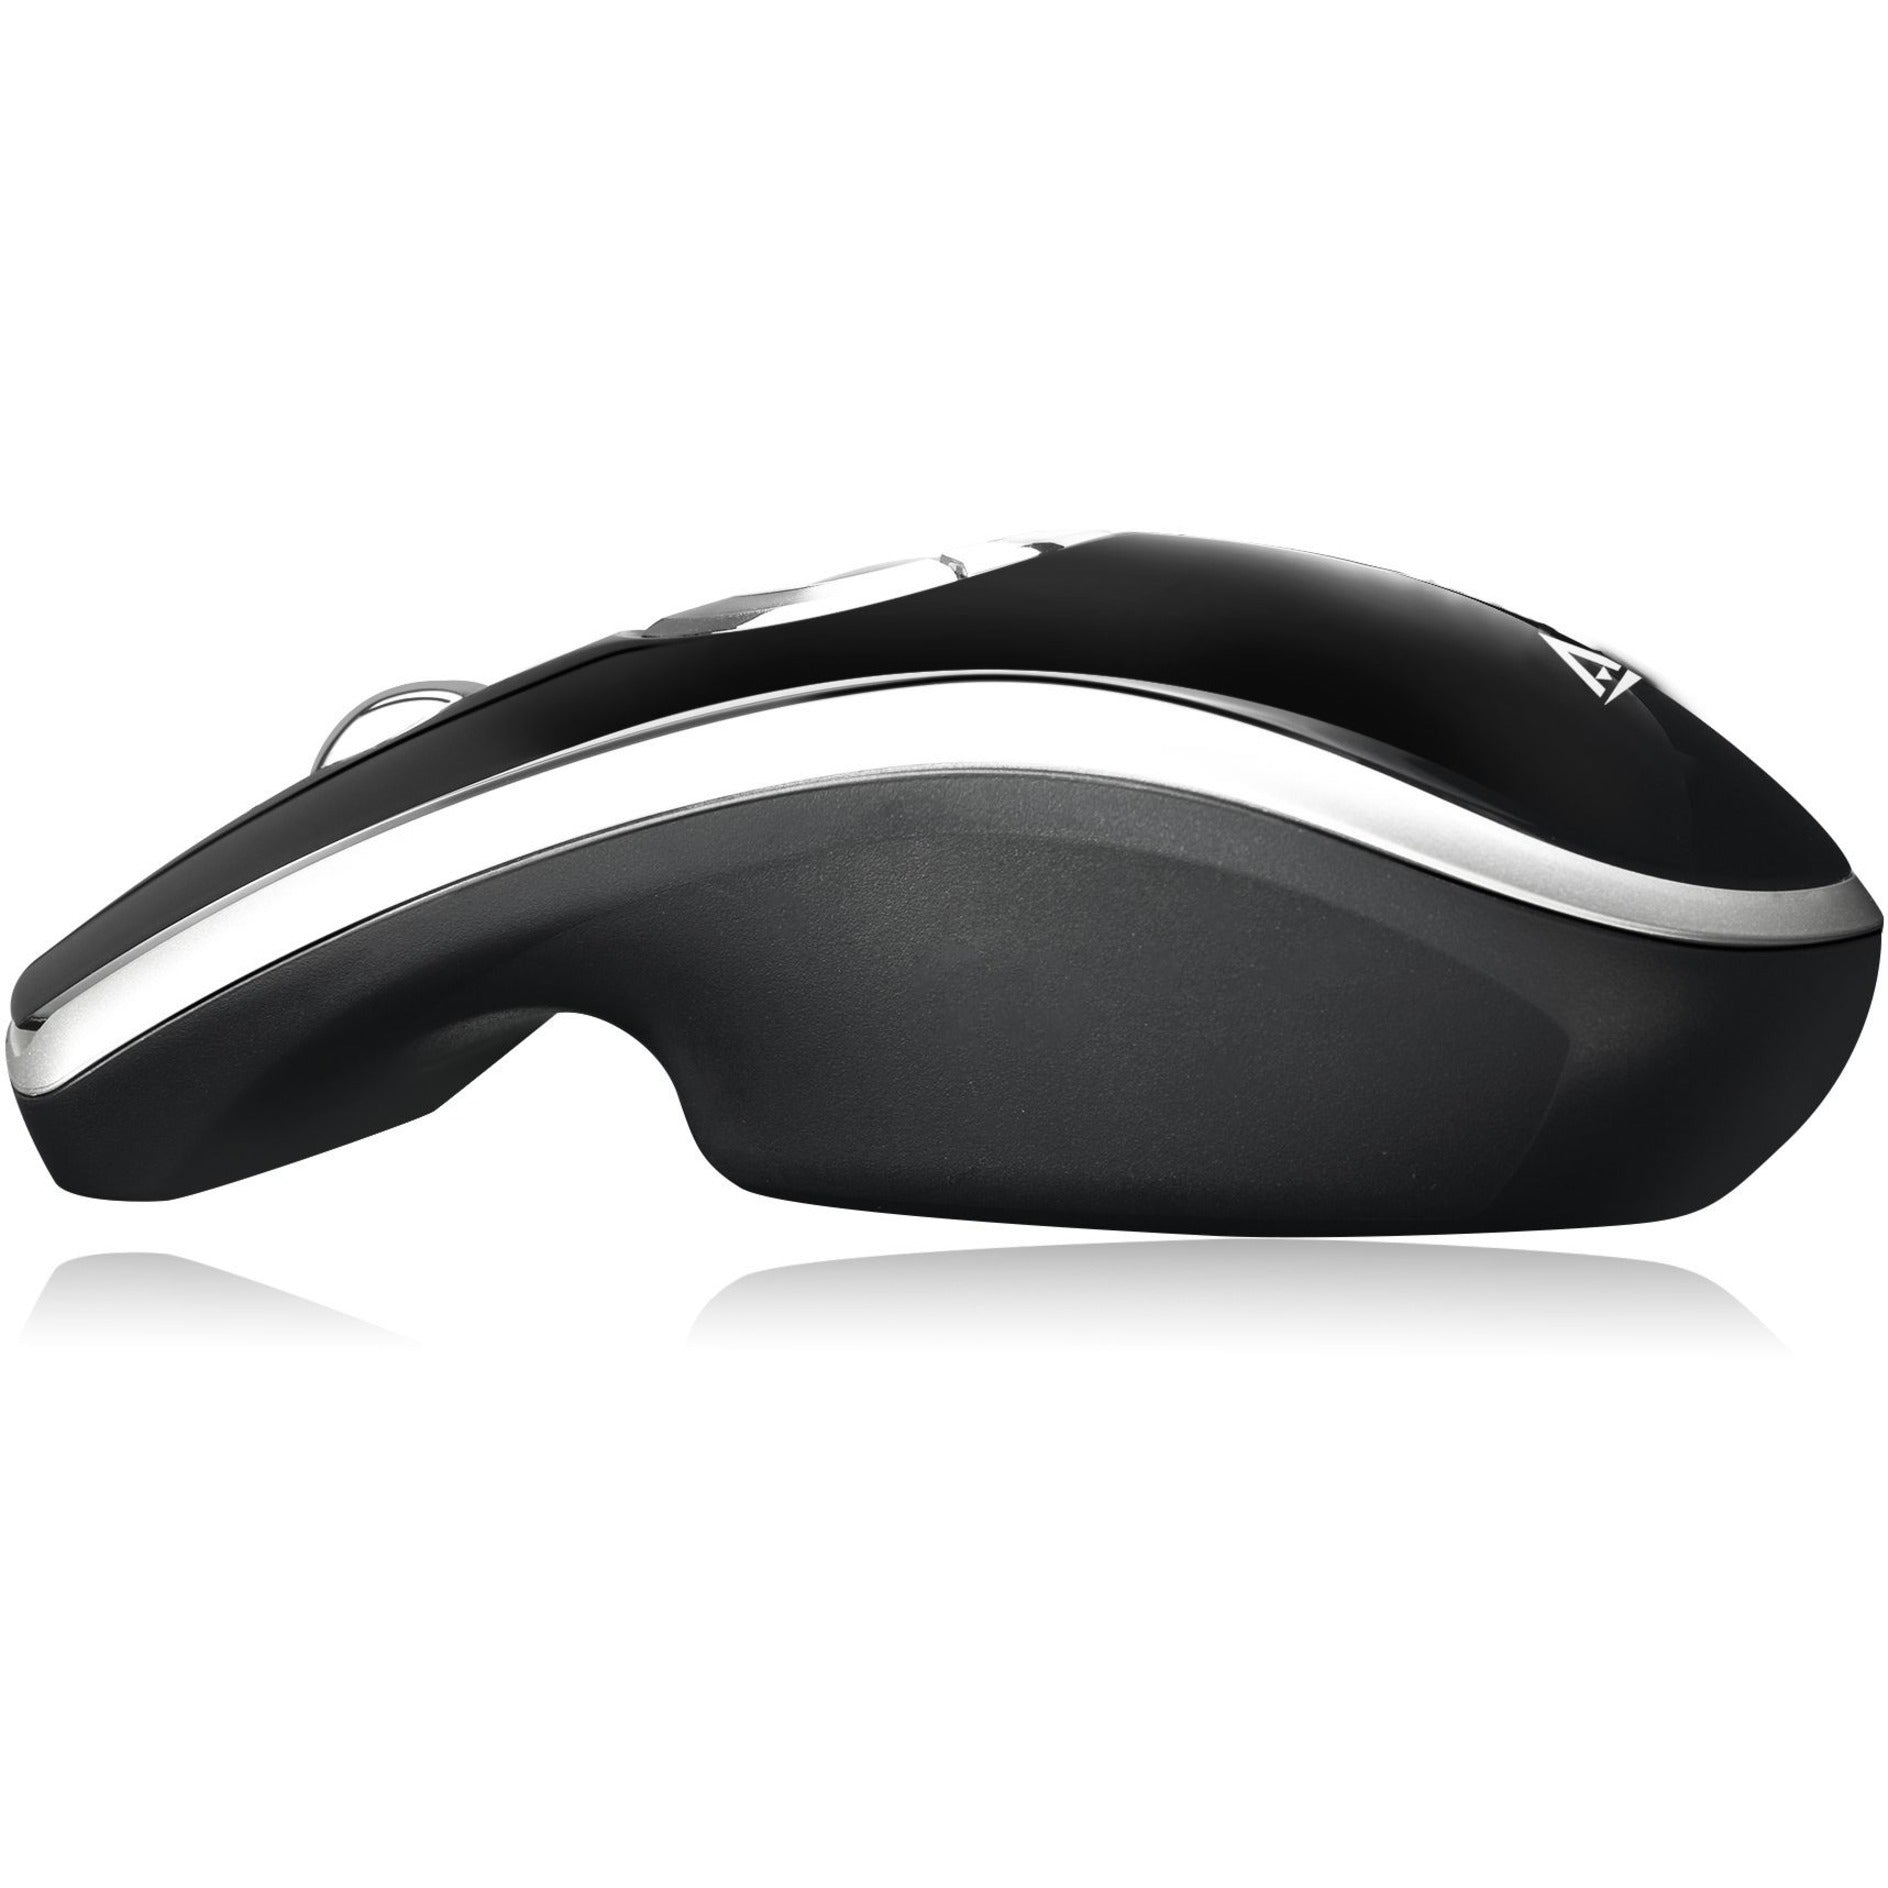 Adesso iMouse P20 Mouse/Presentation Pointer, Wireless Rechargeable Air Mouse Elite for Desktop Computer